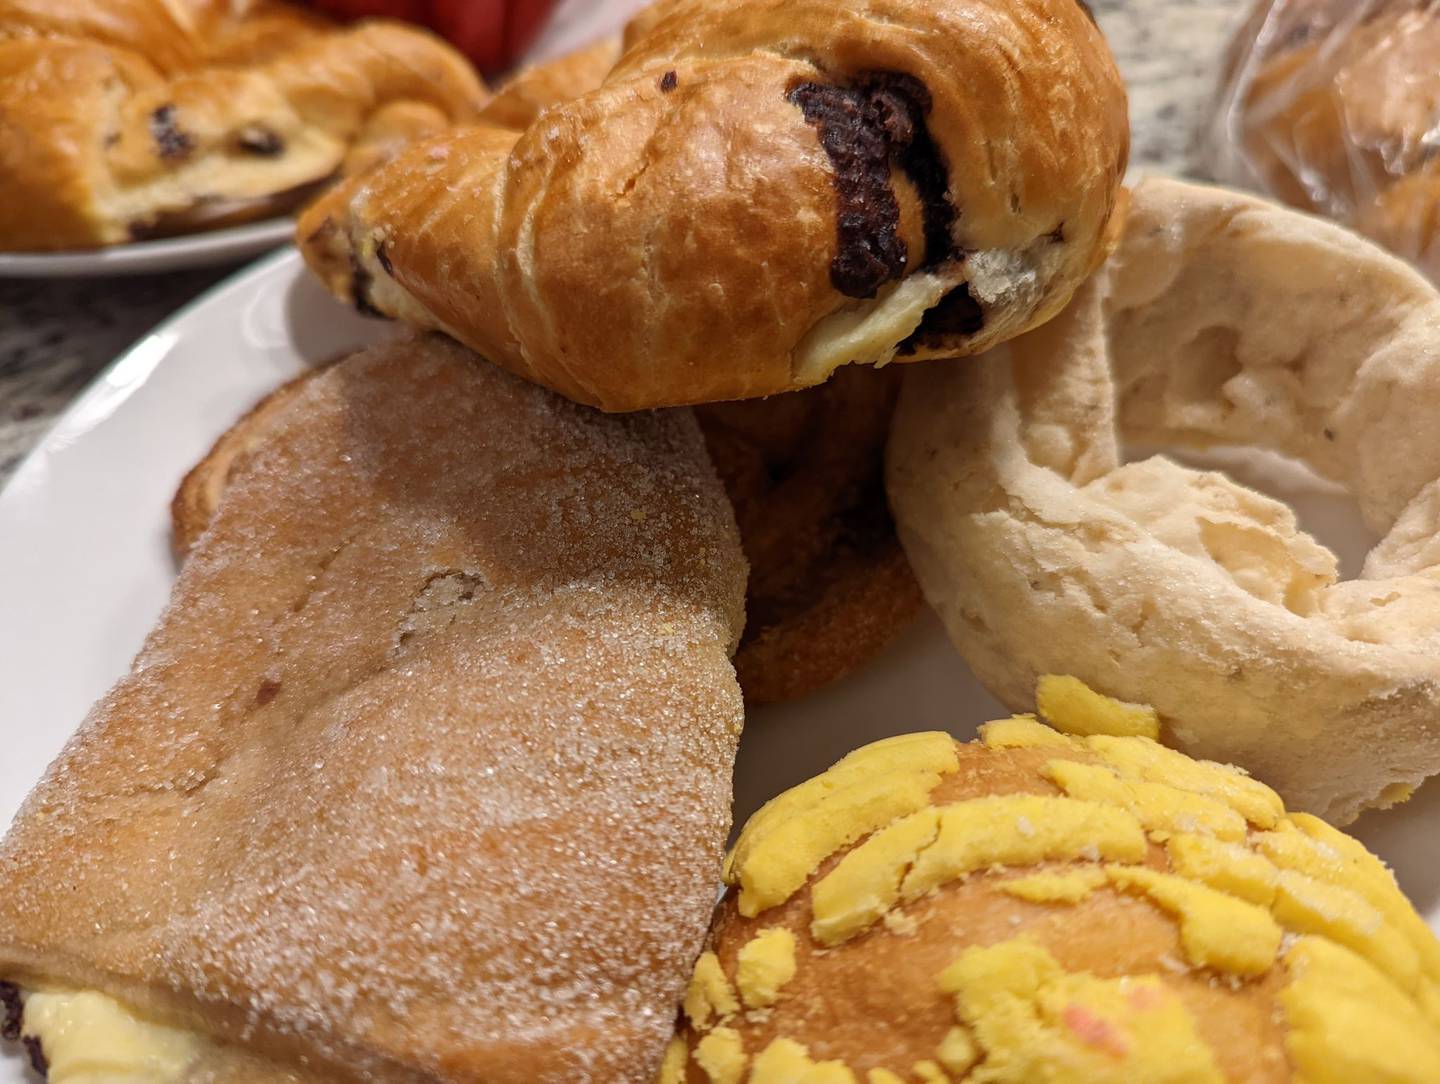 La Chicanita Bakery in Crest Hill offers a wide variety of homemade breads and pastries, juices, sandwiches and custom cakes. Pictured, clockwise, are a chocolate croissant, fried dough, concha and a cream cheese filled danish.